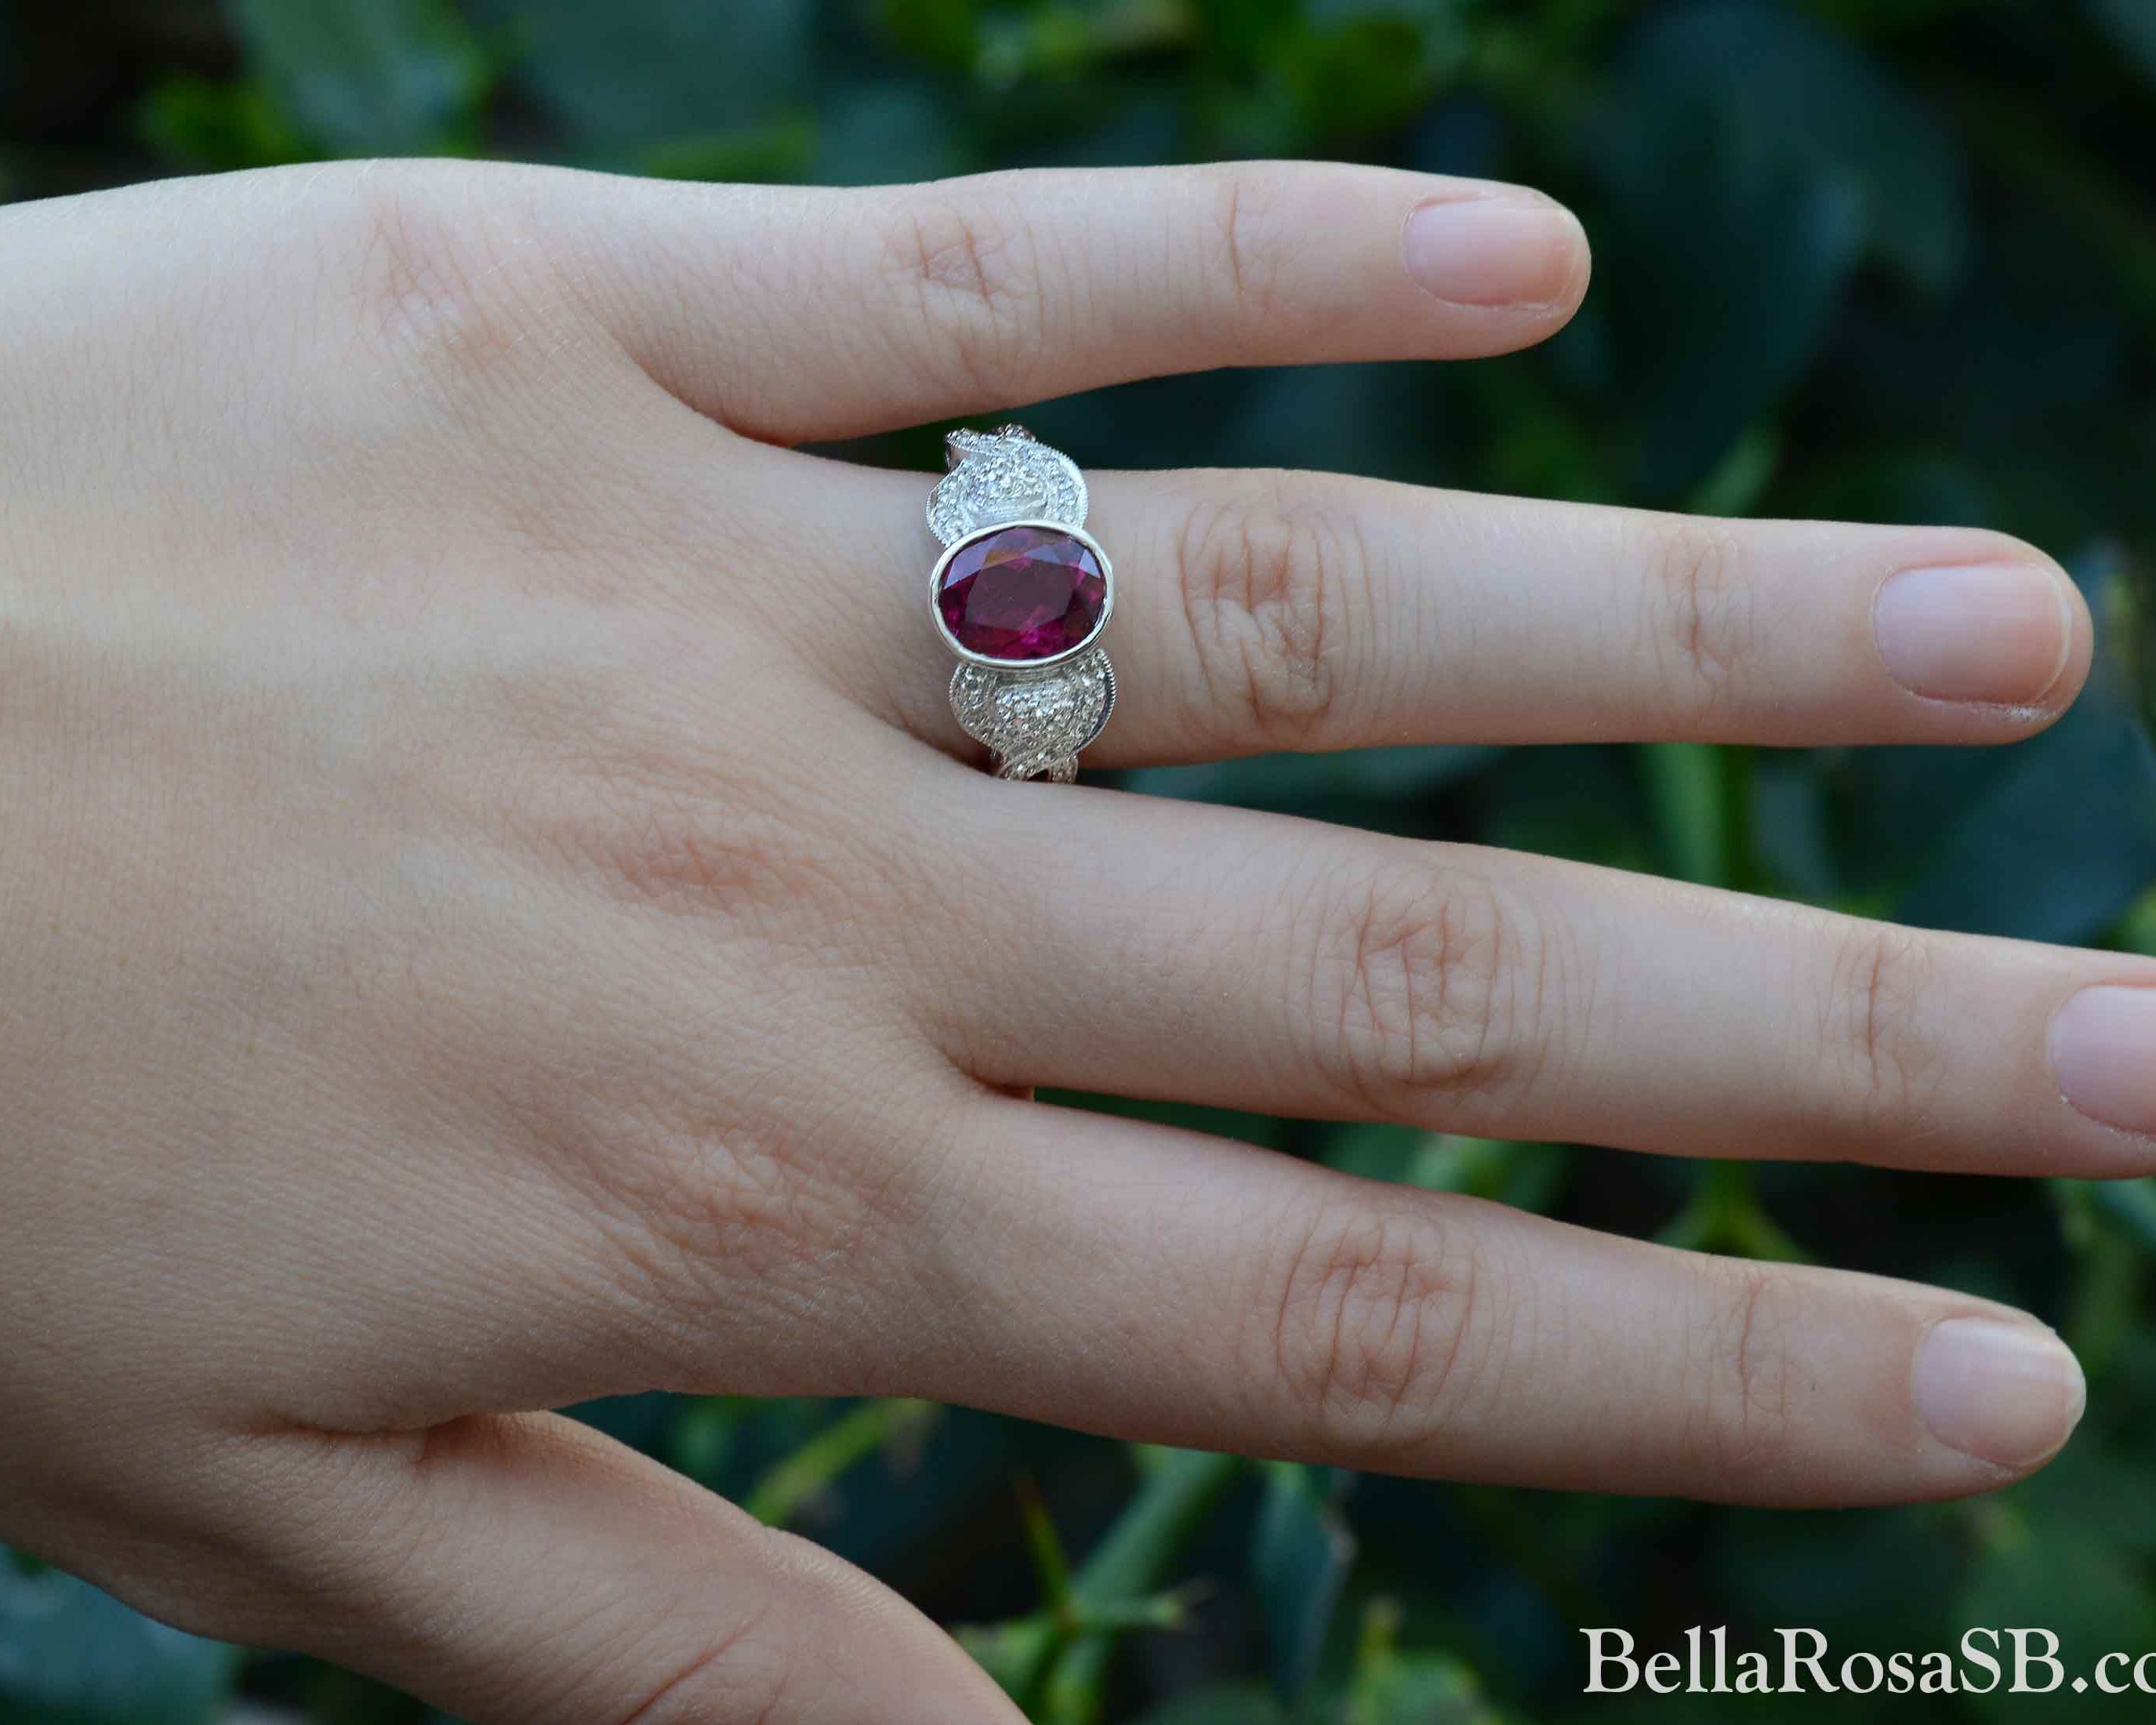 A retro purple red oval tourmaline engagement ring.